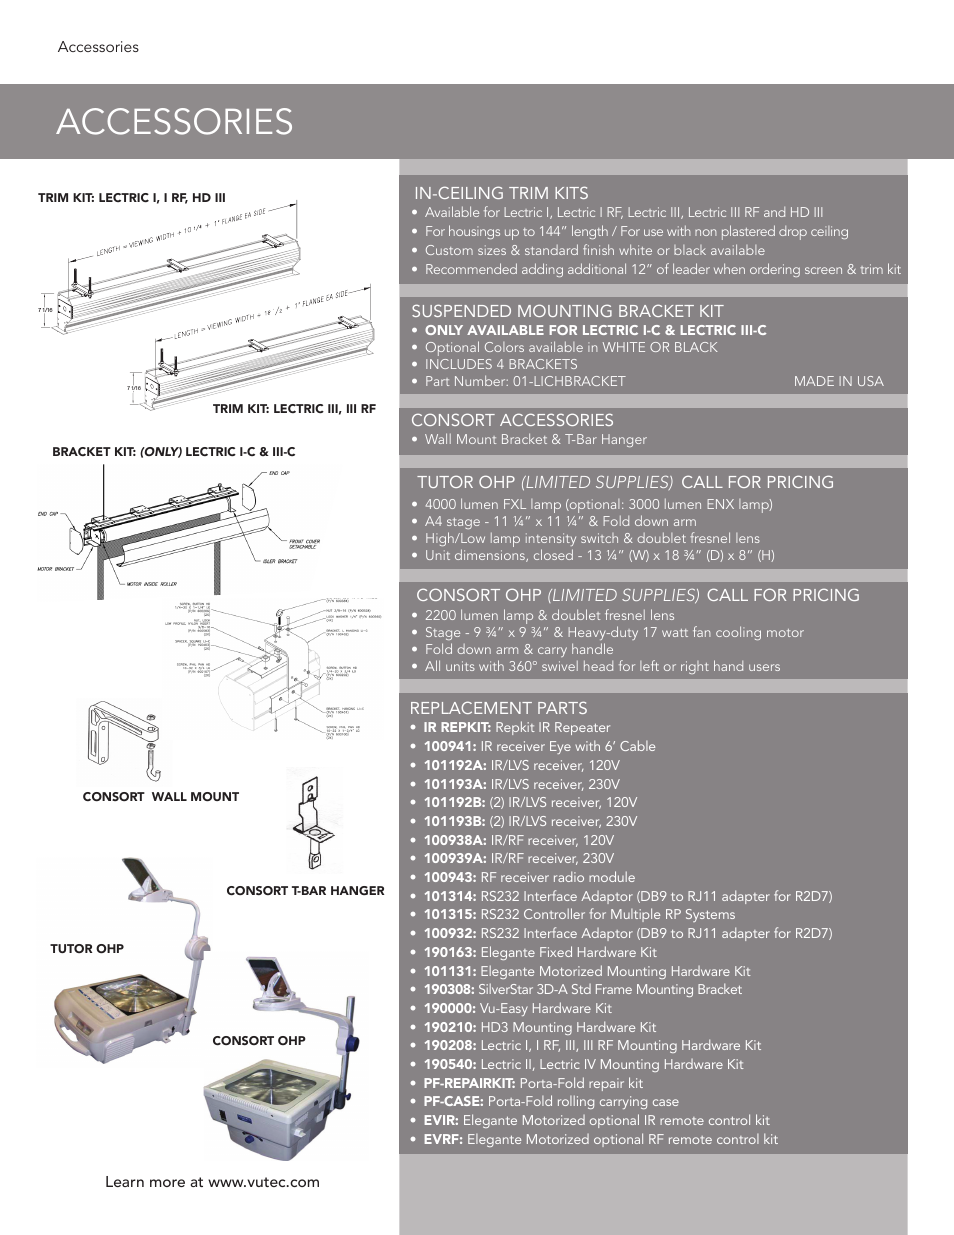 ACCESSORIES - Product Sheet